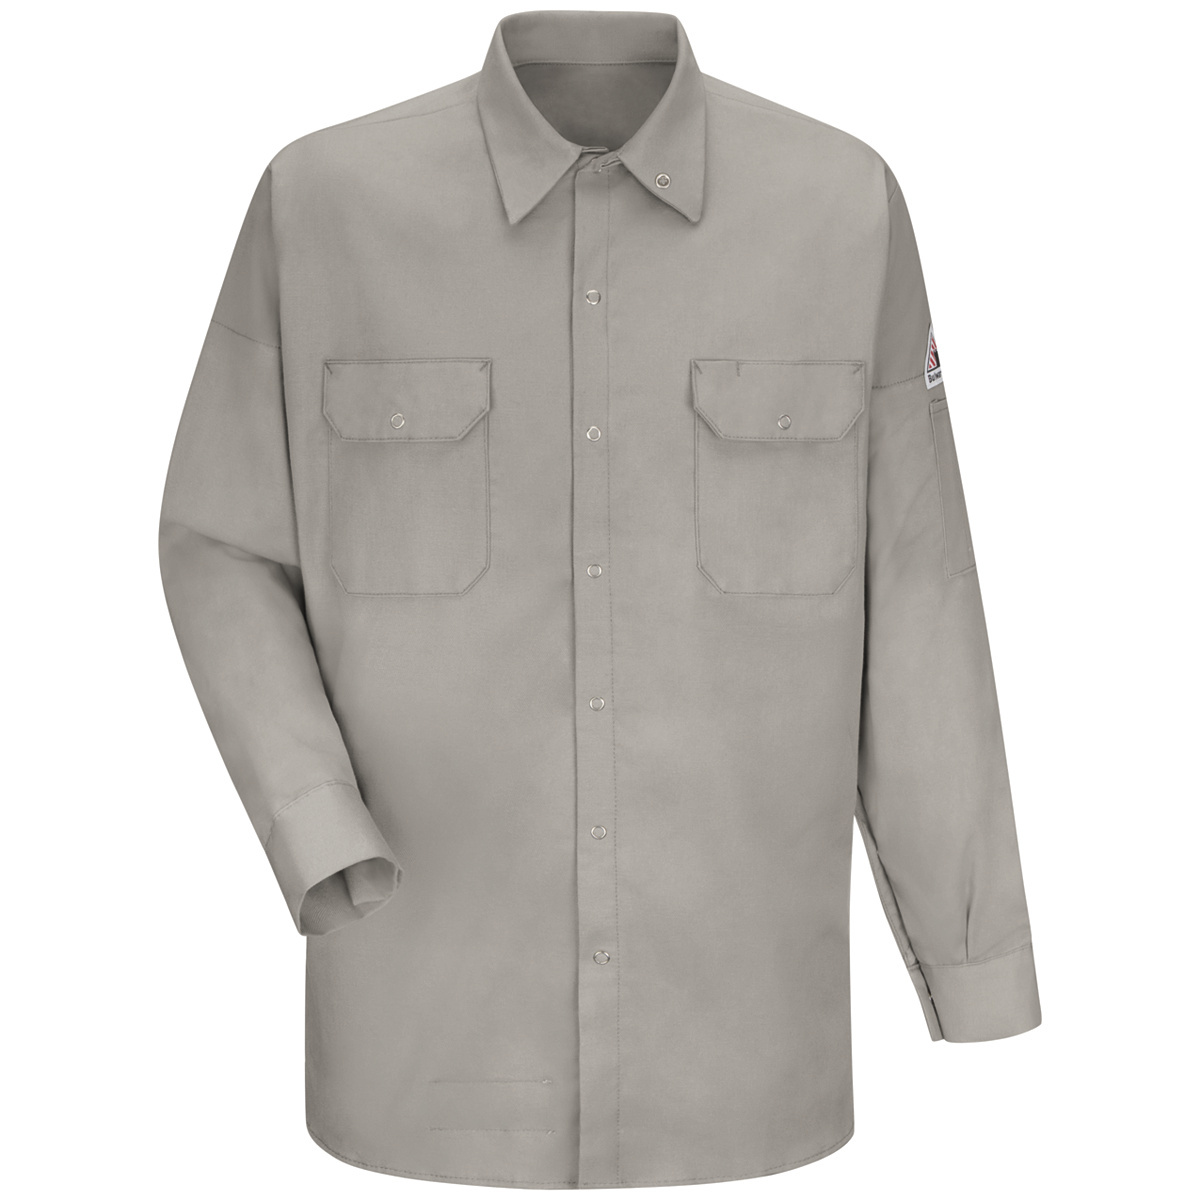 Bulwark® 5X Tall Silver Gray EXCEL FR® Cotton Flame Resistant Welding Work Shirt With Gripper Front Closure And TUFFWELD® Lined